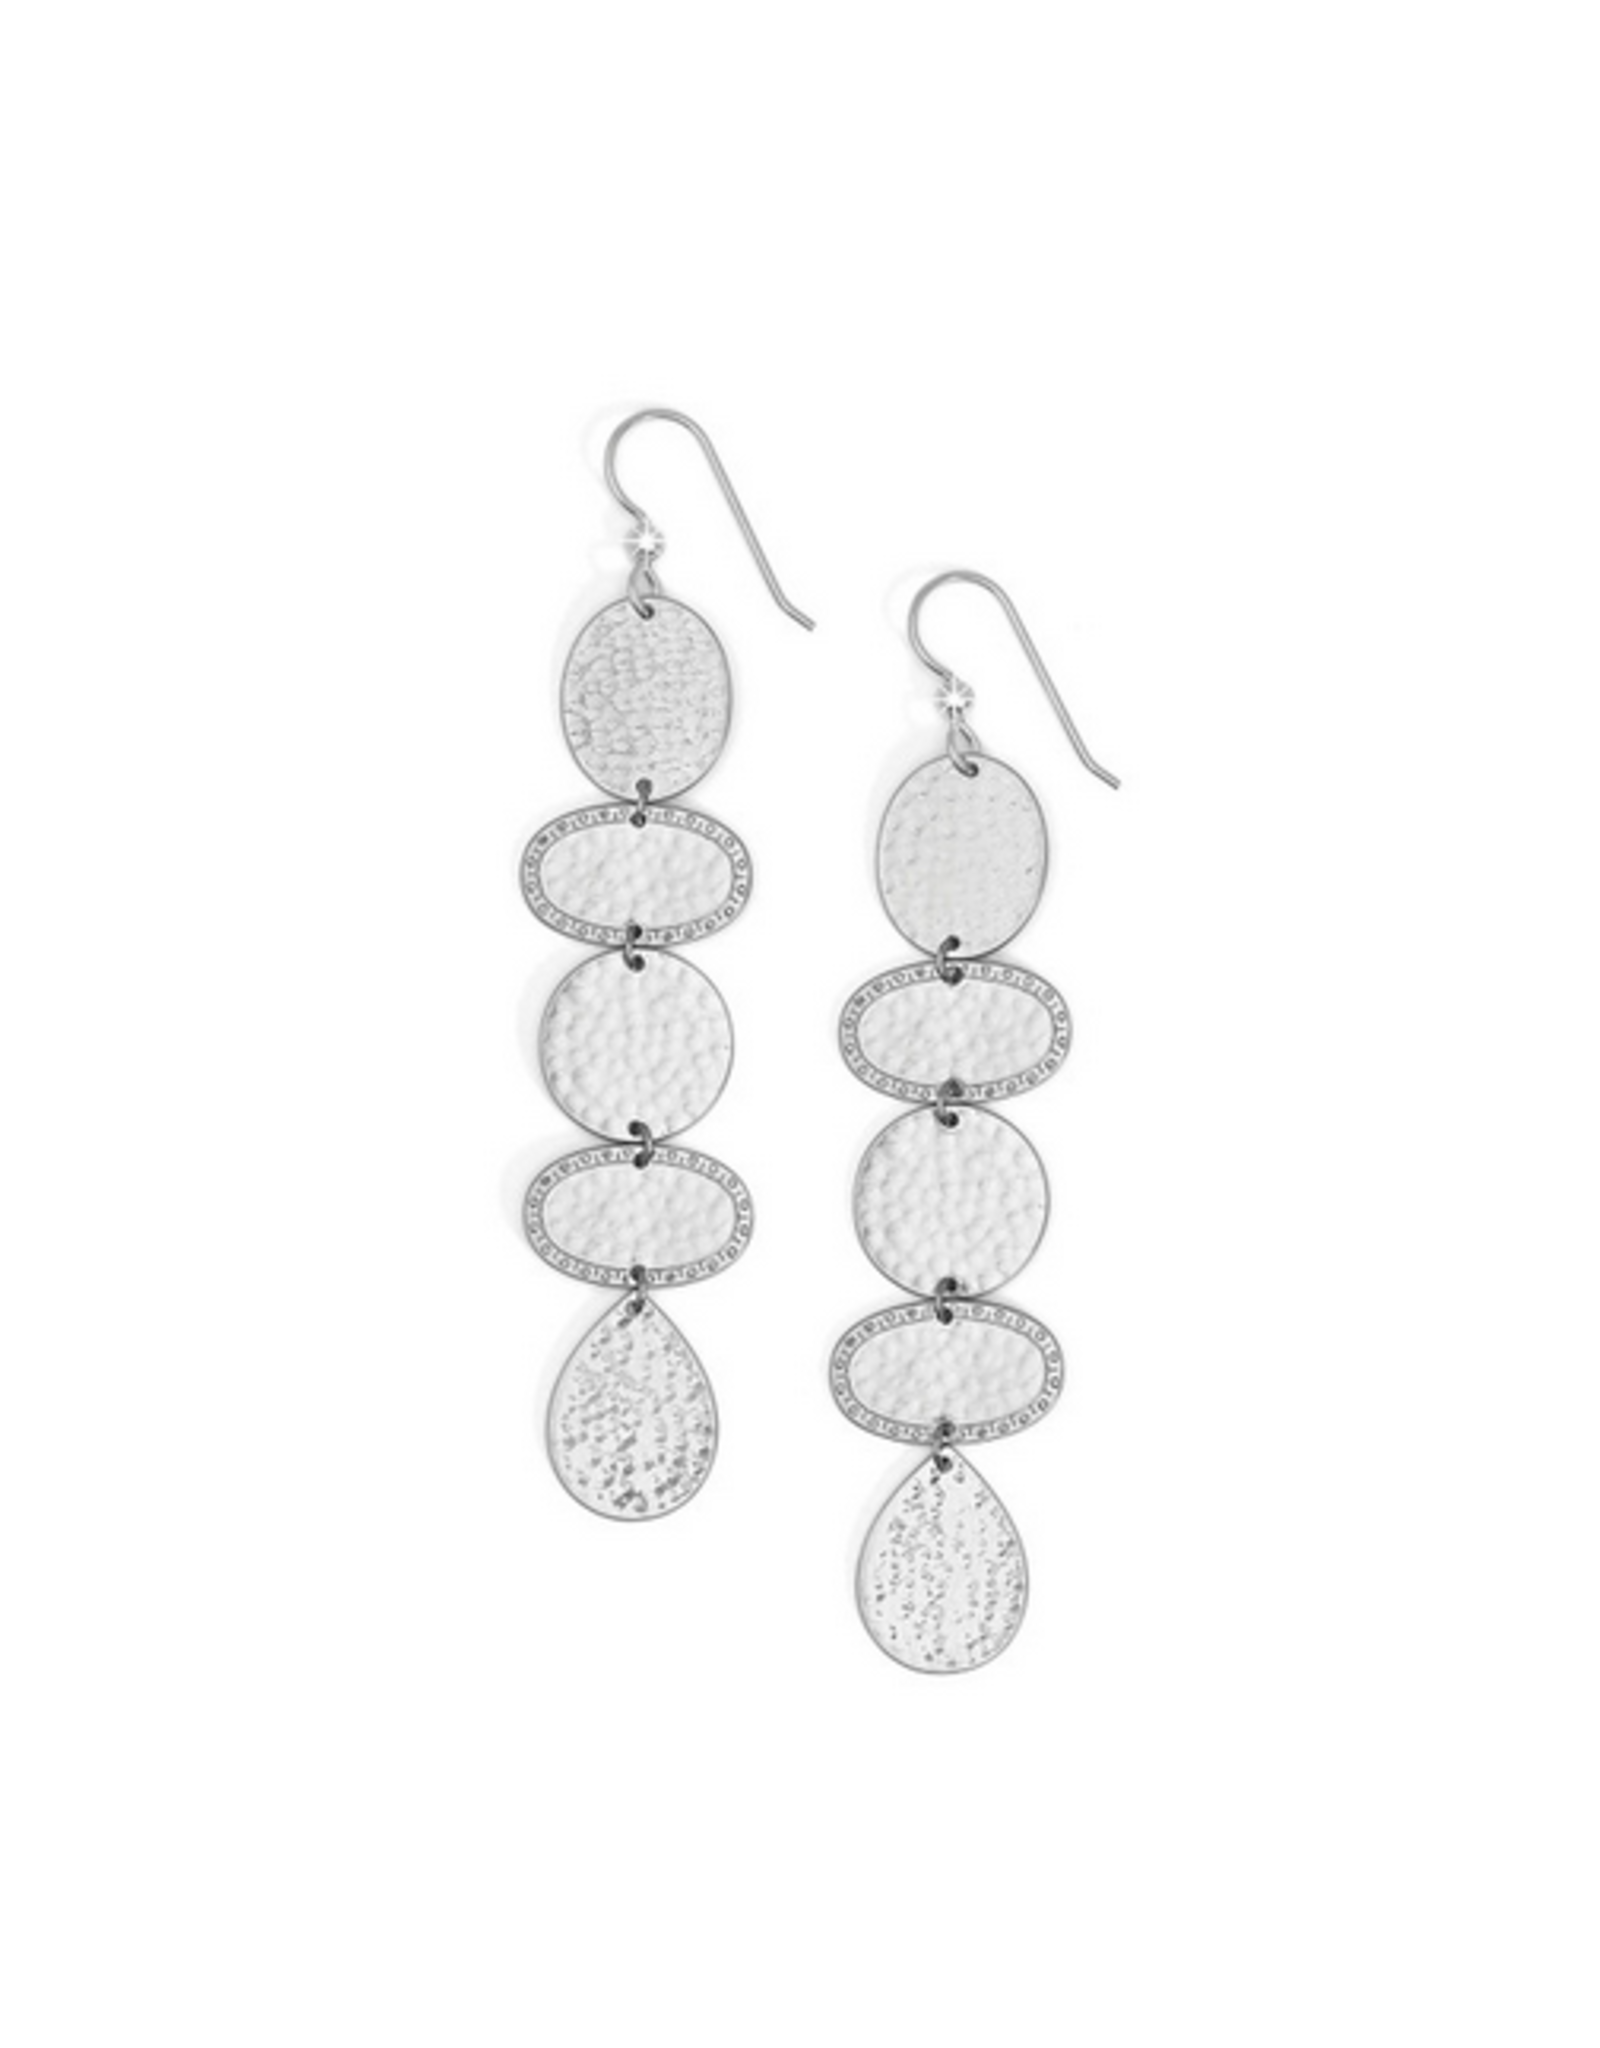 Brighton Palm Canyon Long Sil Frenchwire Earrings